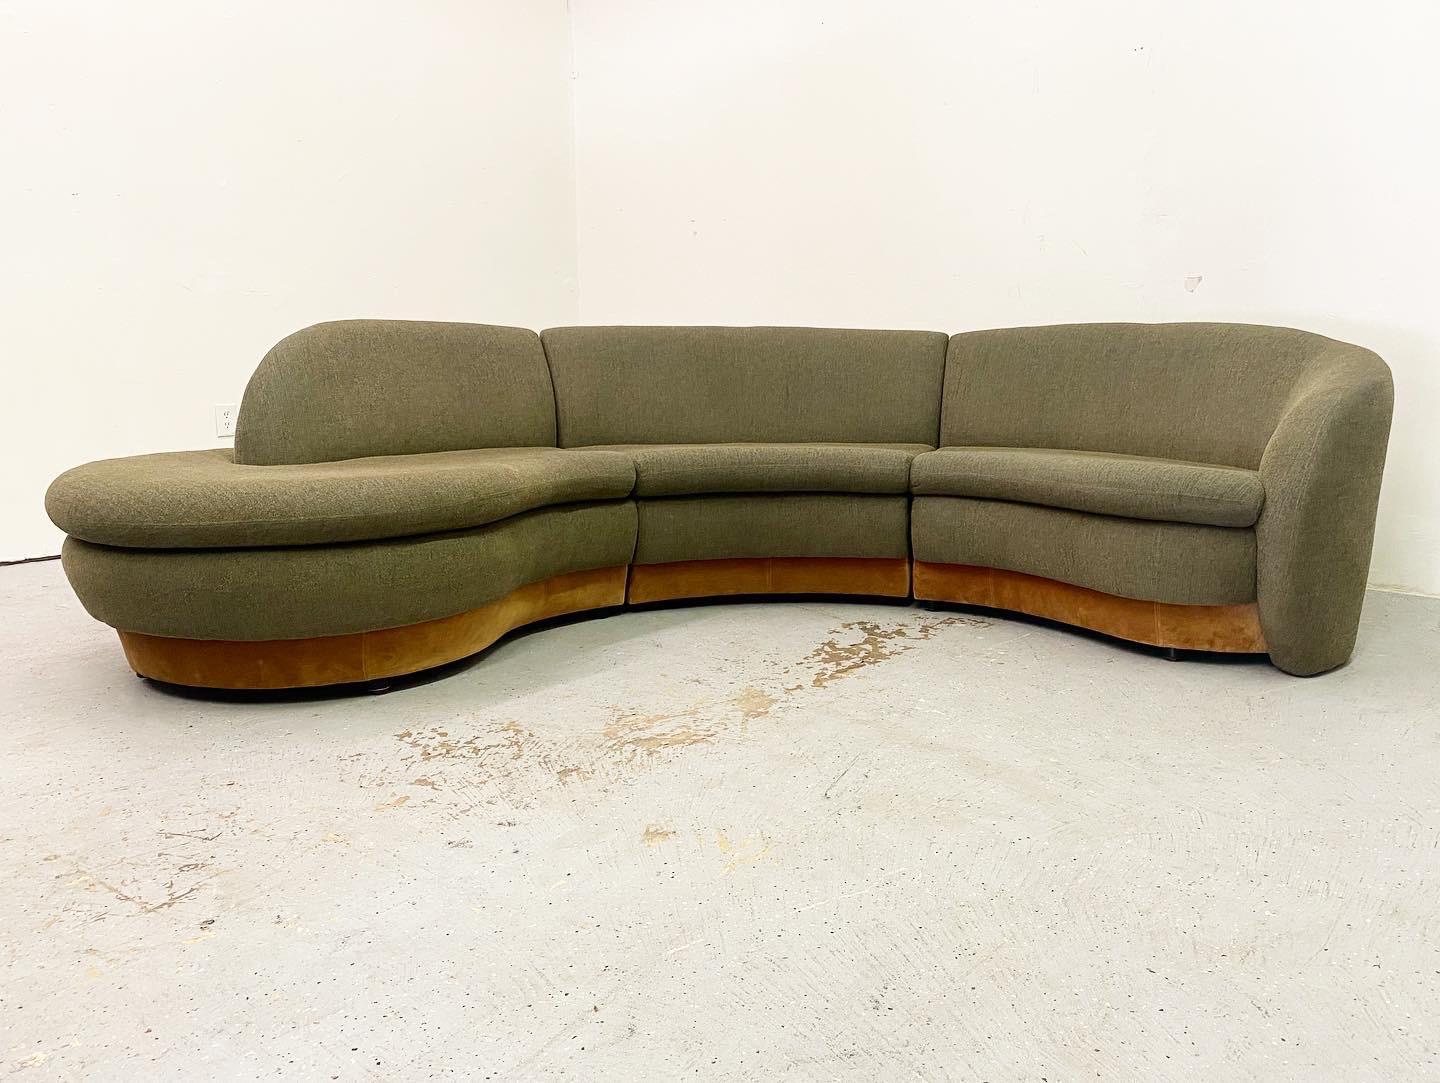 Beautiful serpentine form to this Preview Sectional in the manner of Vladimir Kagan. A seldom found example with exaggerated form and perfect scale. Original upholstery is usable but would be amazing restored.